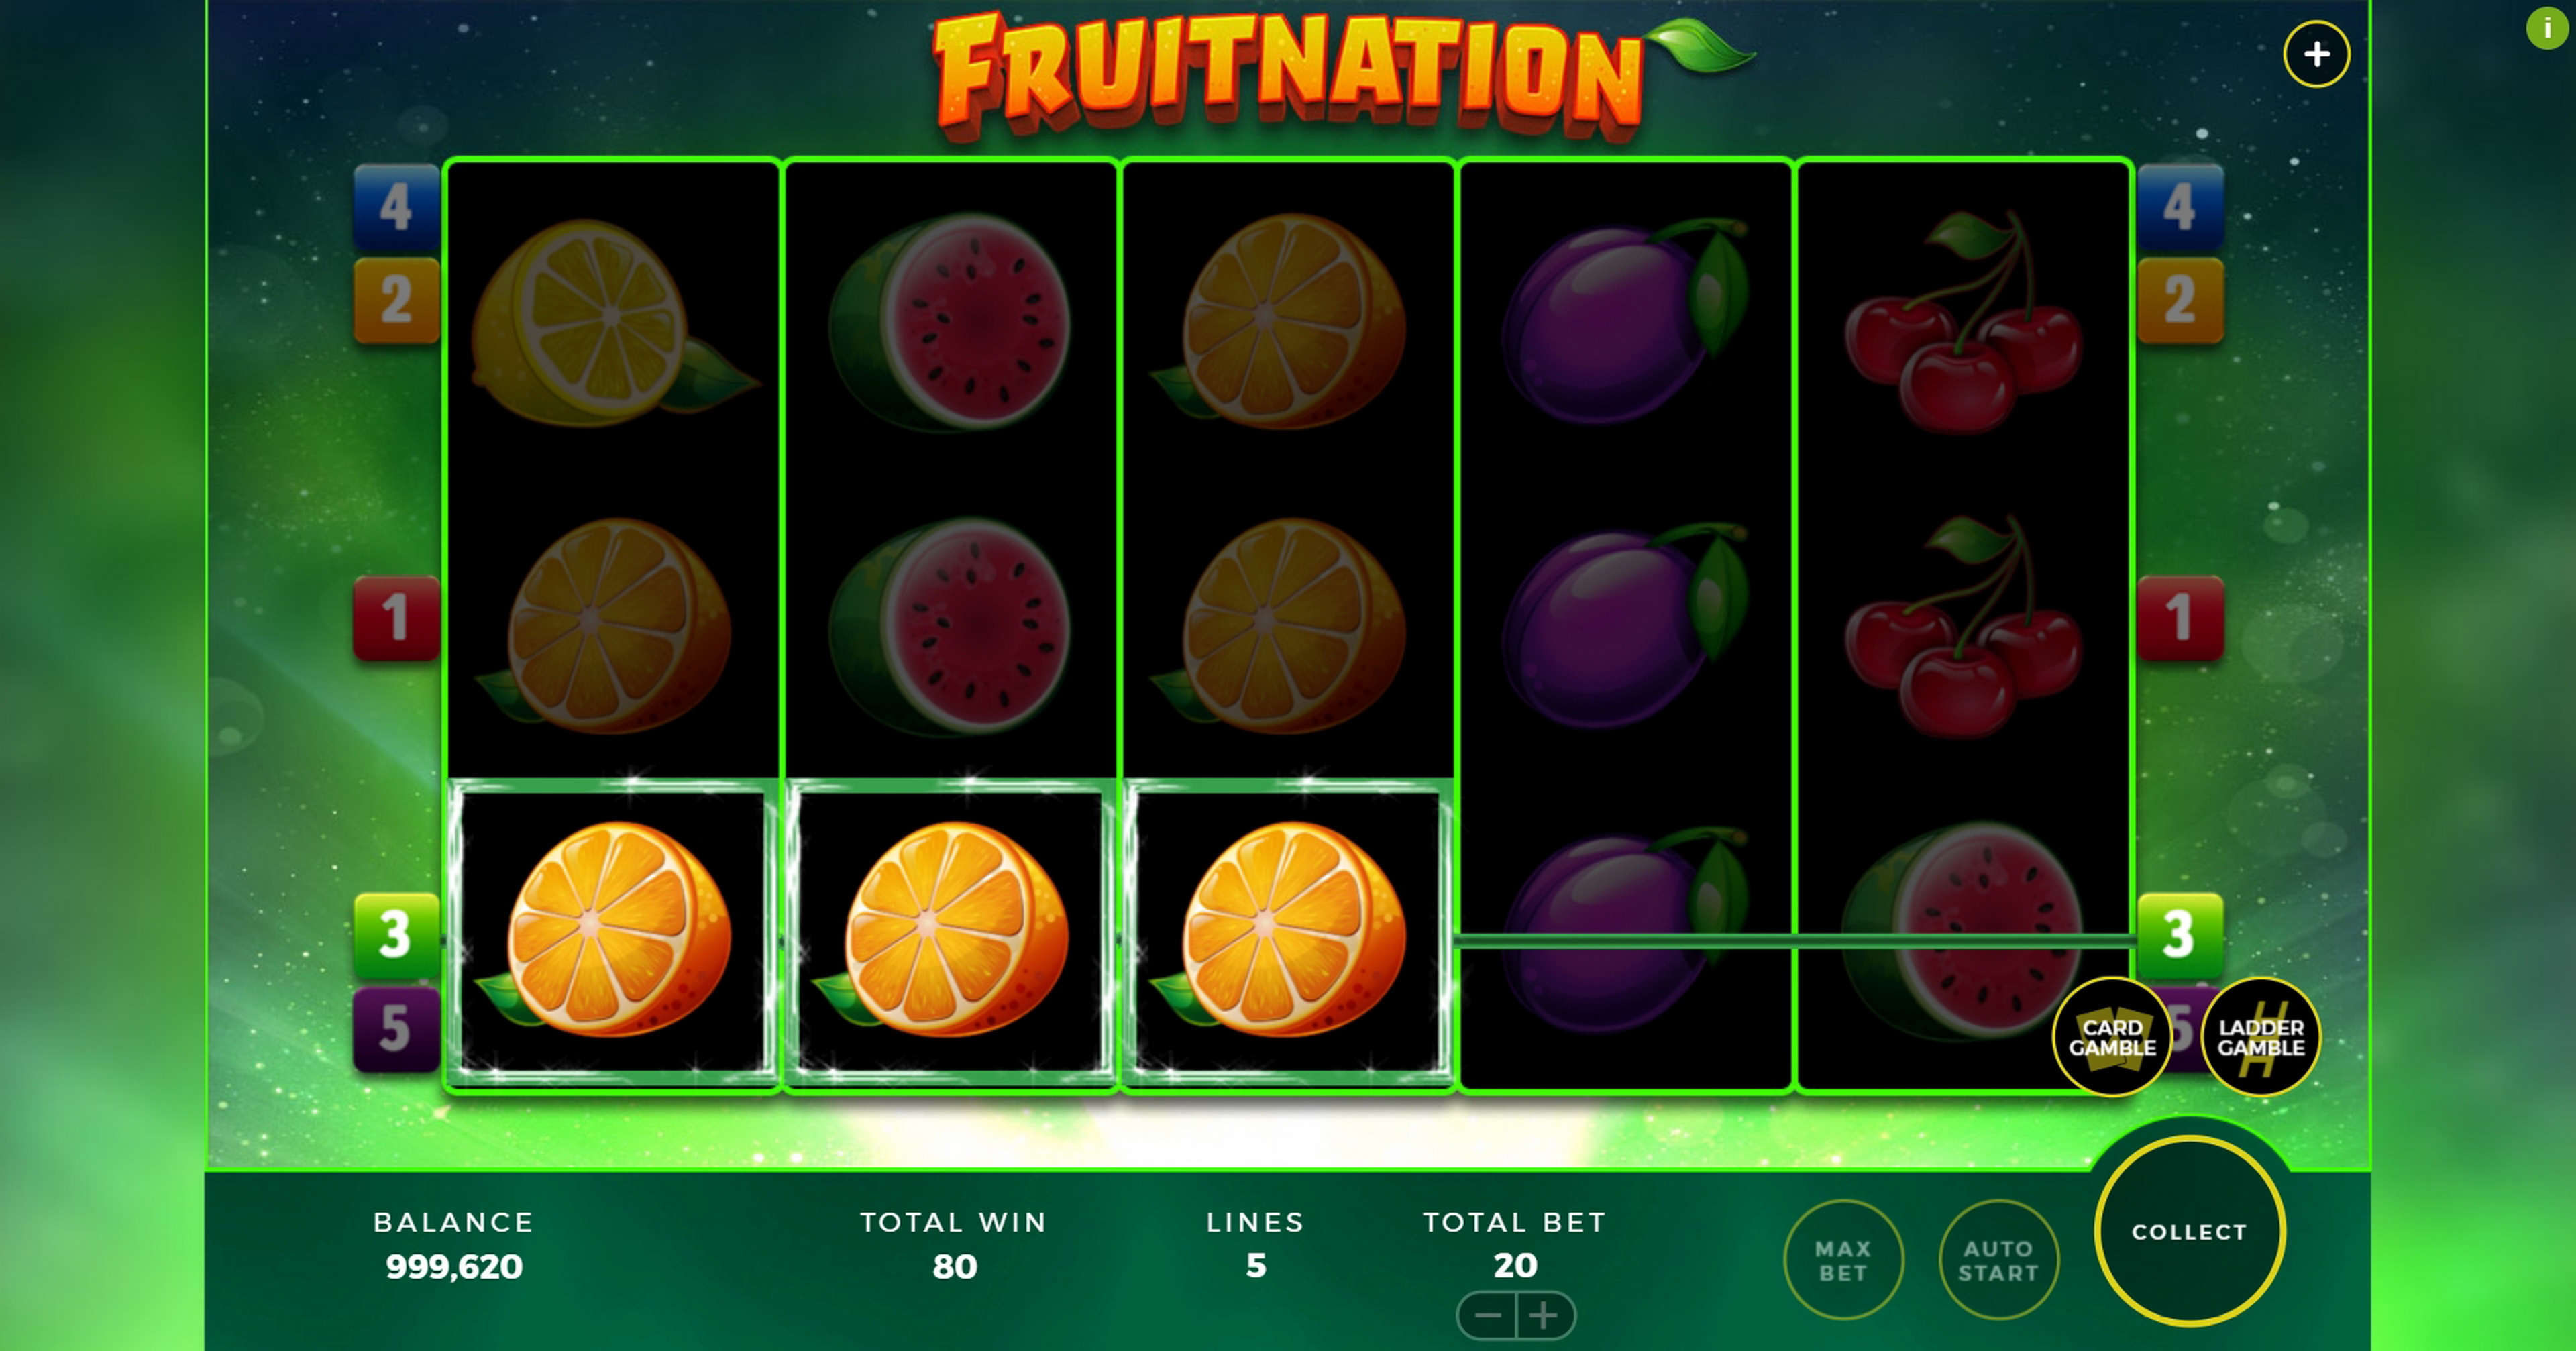 Win Money in Fruitnation Free Slot Game by Bally Technologies